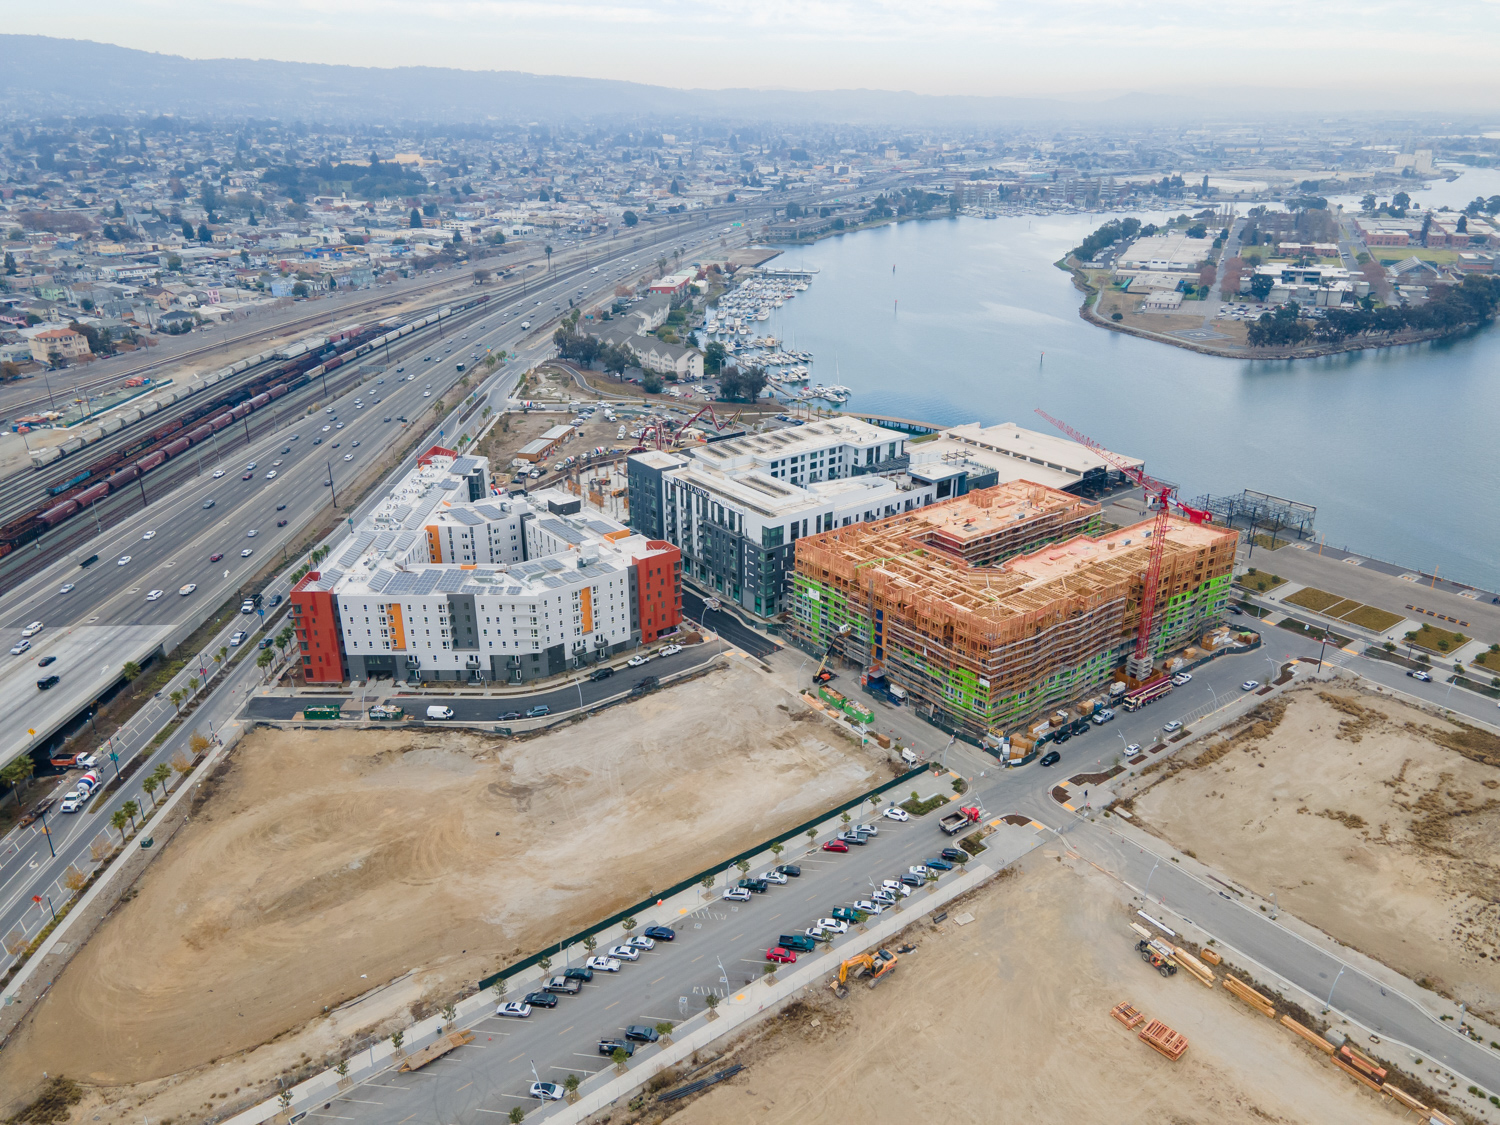 Brooklyn Basin viewed from drone, image via Andrew Campbell Nelson